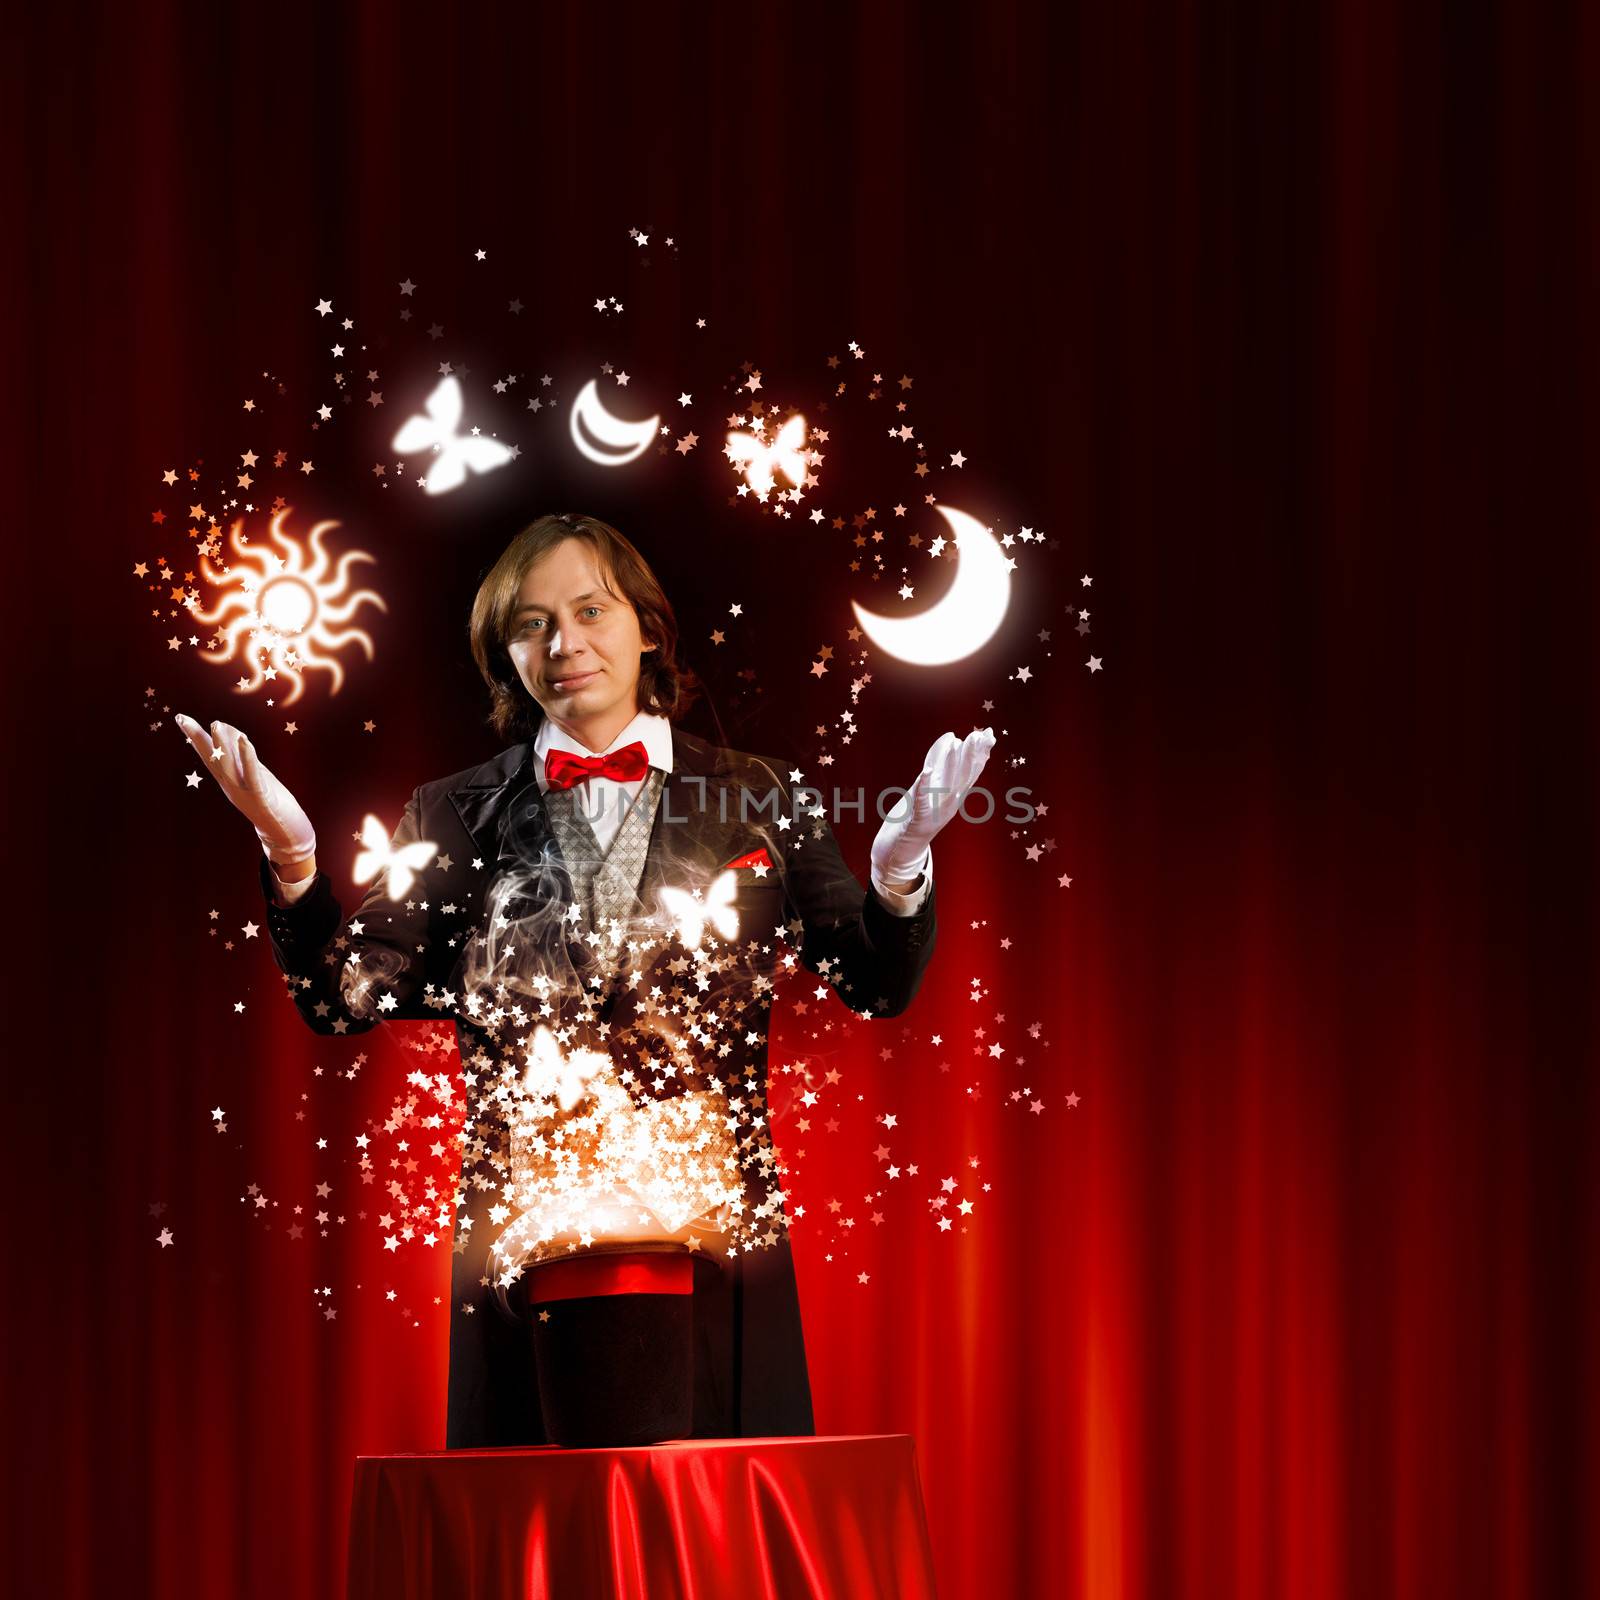 Image of magician holding hat with lights and fumes going out